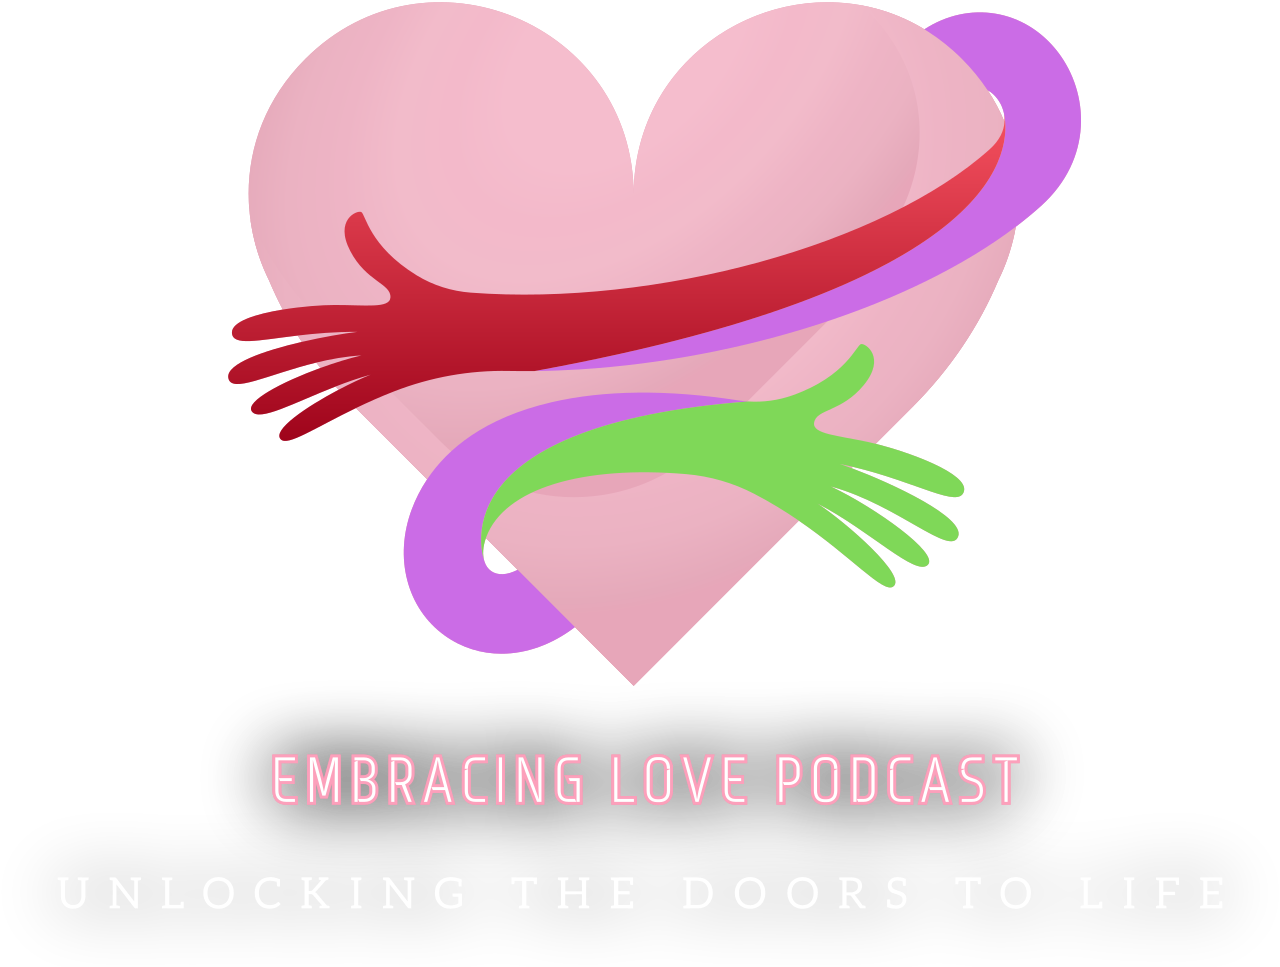 Embracing Love Podcast 's web page